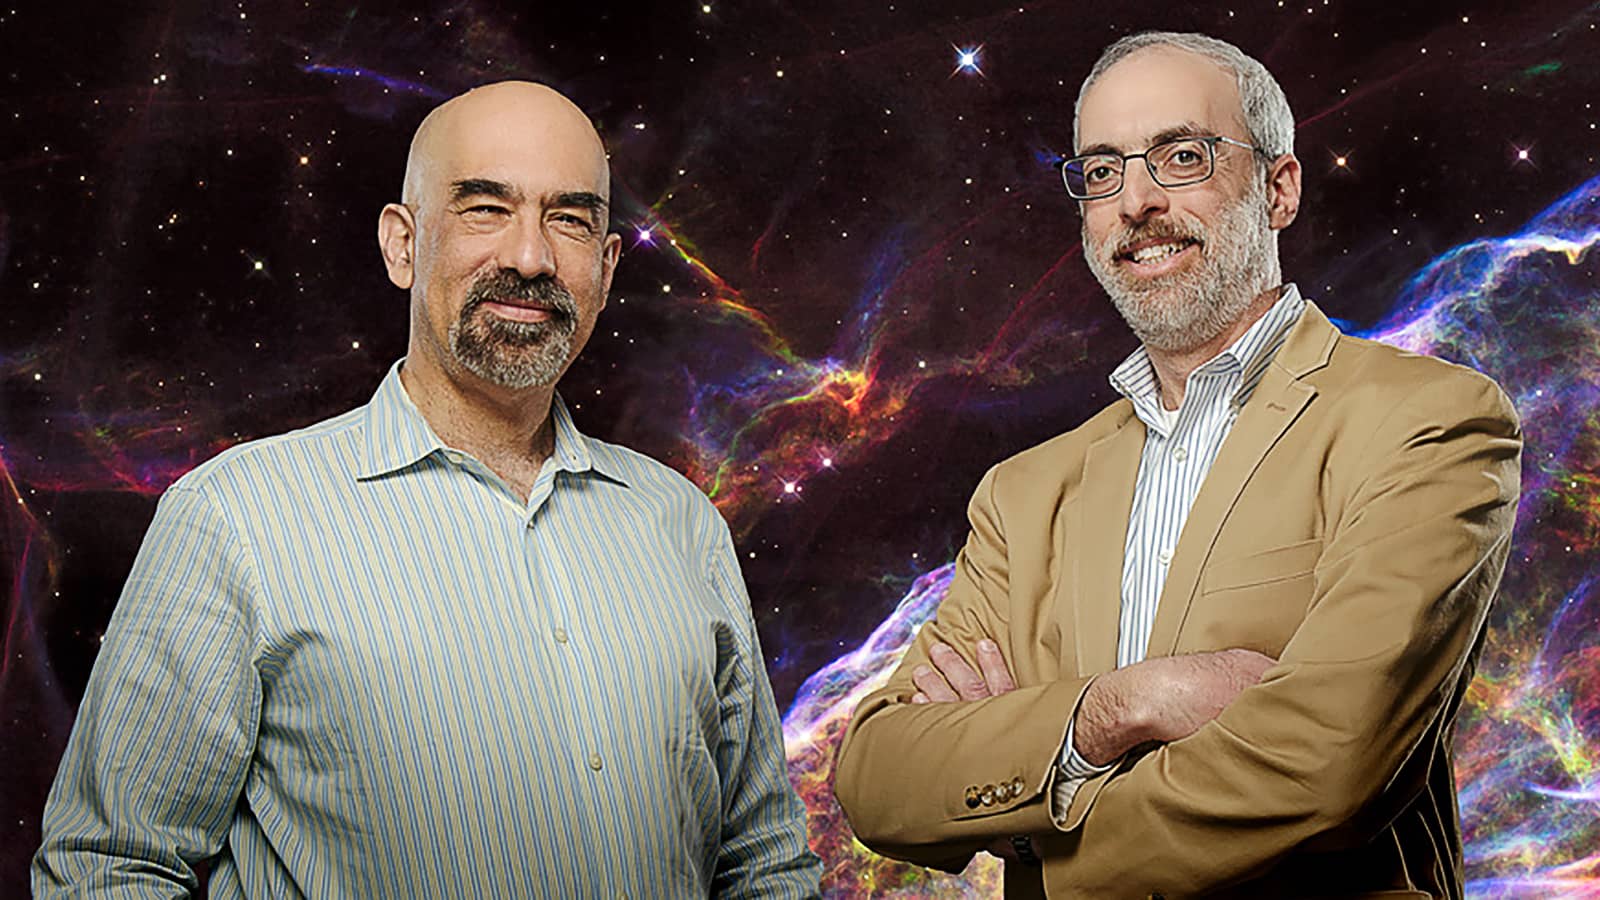 David Spergel and Jeremy Kasdin pose in front of colorful space image